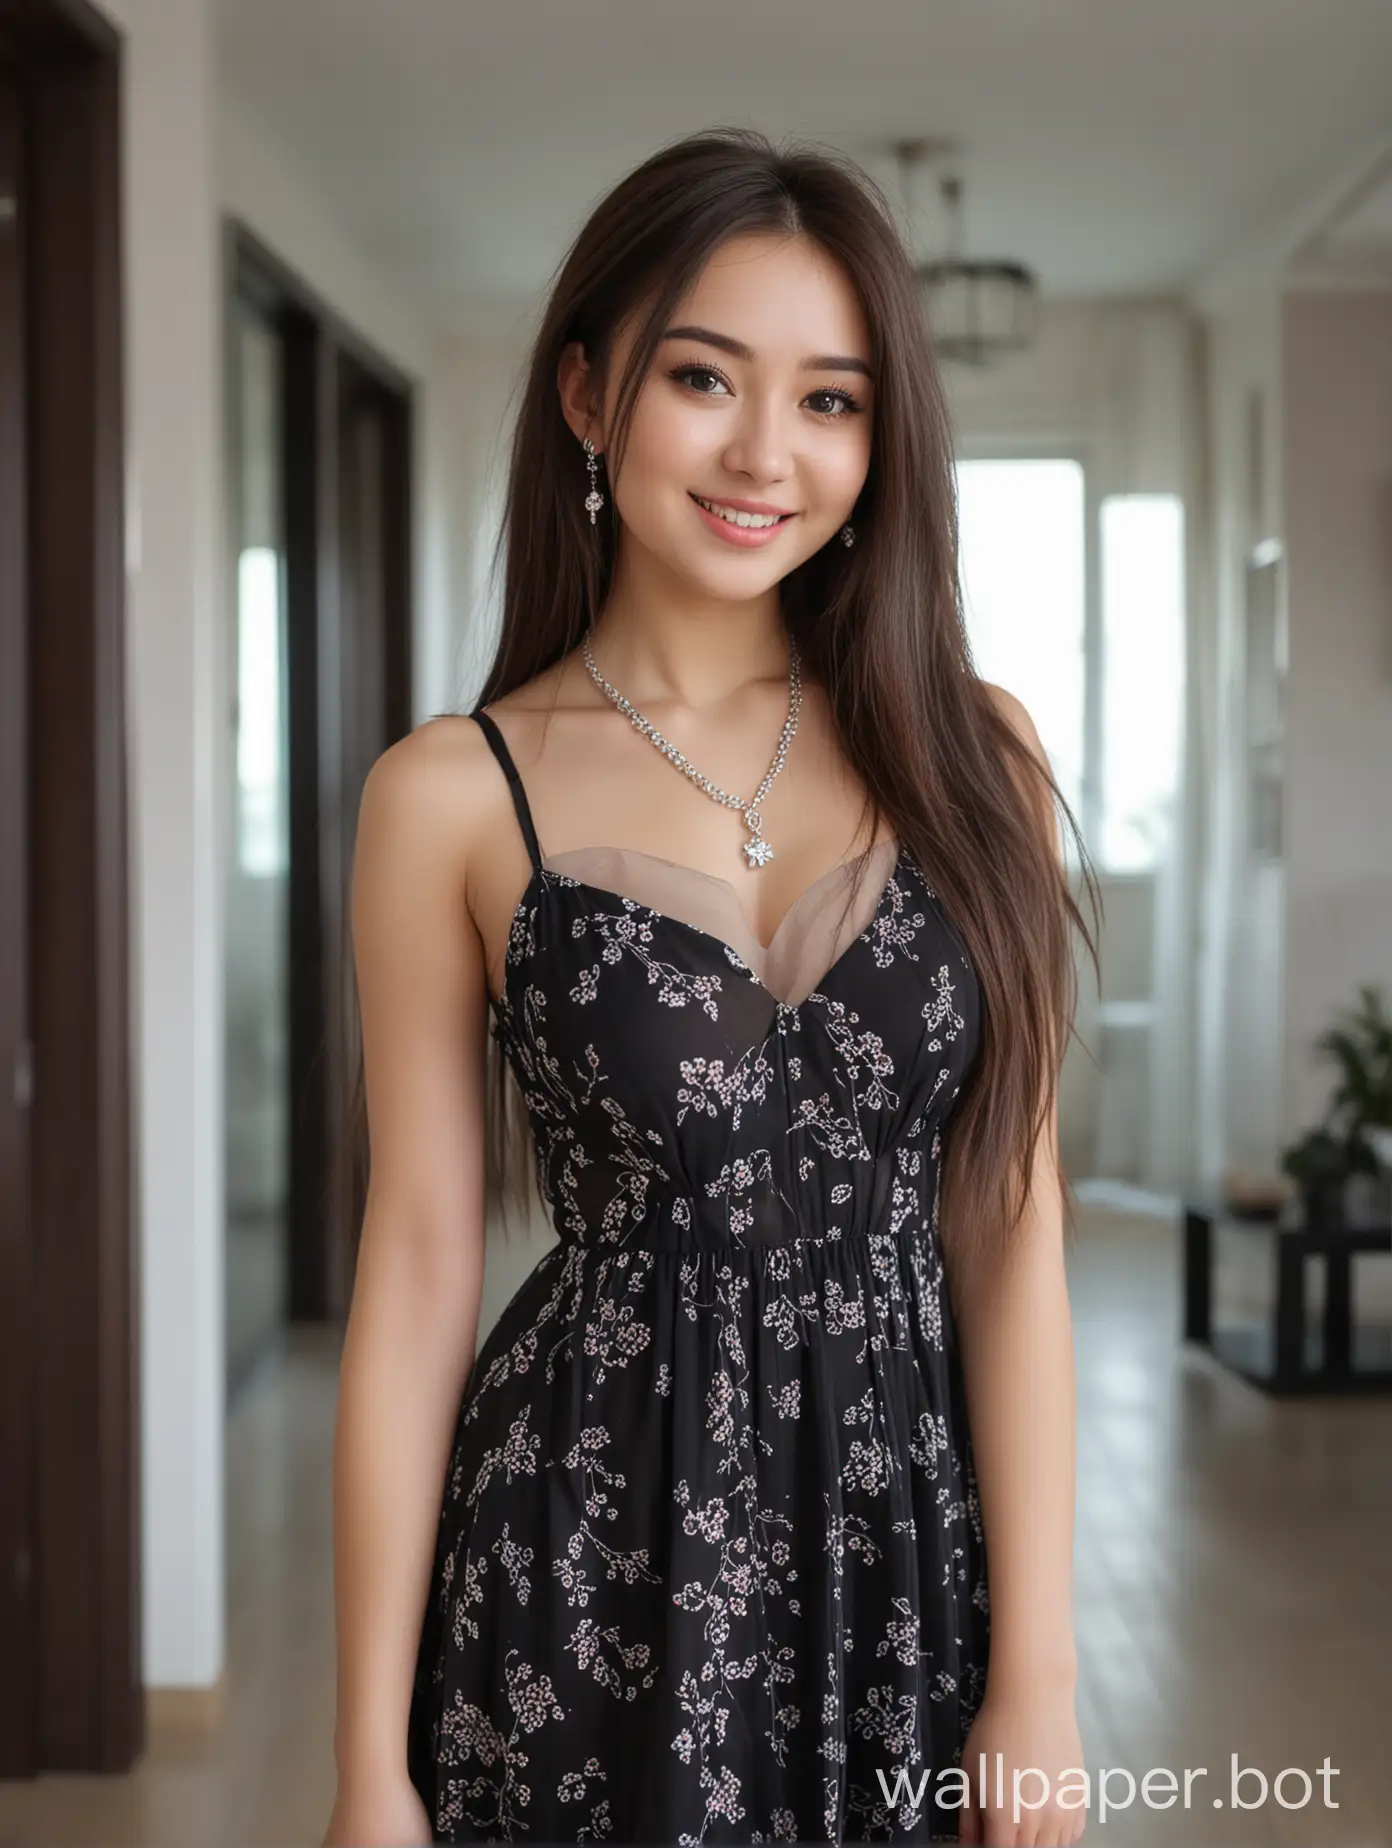 Generate an image of a 25 year old beautiful Kazakhstan cute pretty girl big tits ,  A-line Dress Transparent  ,  with a fair skin tone and long hair black. She has a round face with a smile. The background is a modern house interior. The camera shot captures her from head to foot full shot. She is wearing makeup and has a necklace , ear ring and bracelet on.